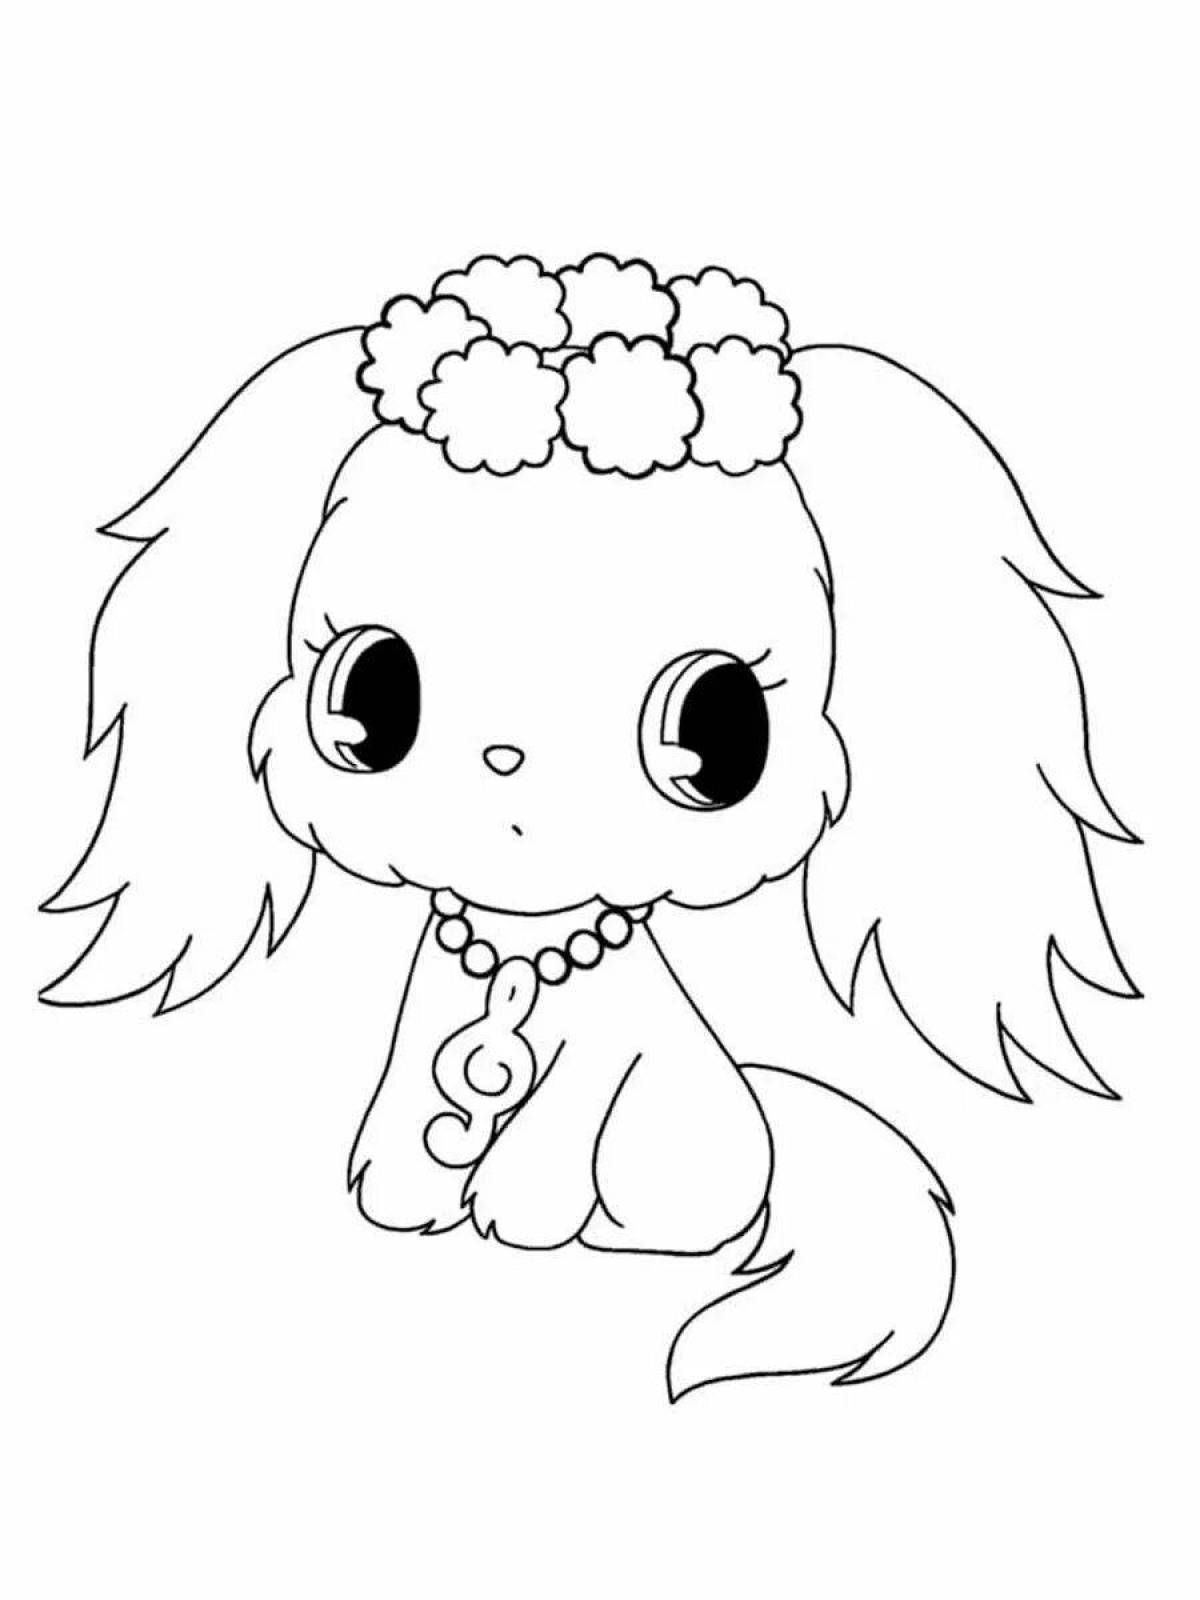 Nifty coloring page anime animals cute